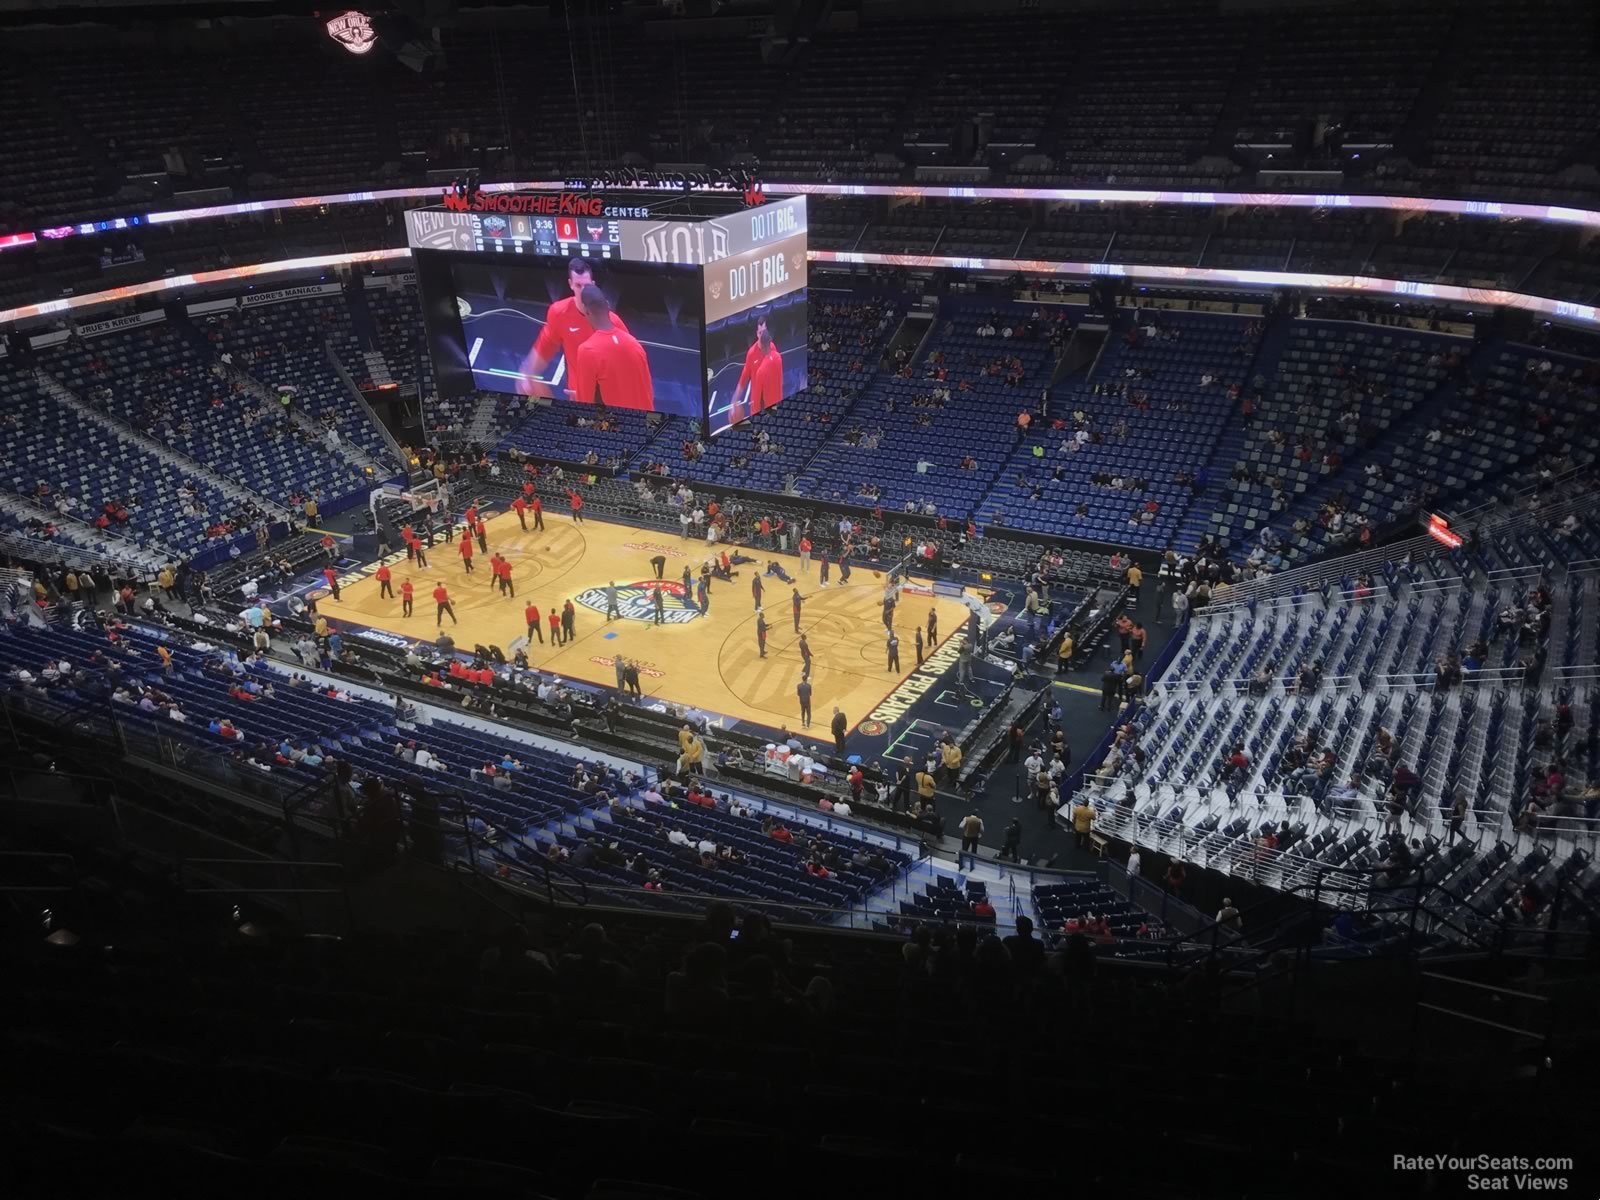 section 313, row 16 seat view  for basketball - smoothie king center